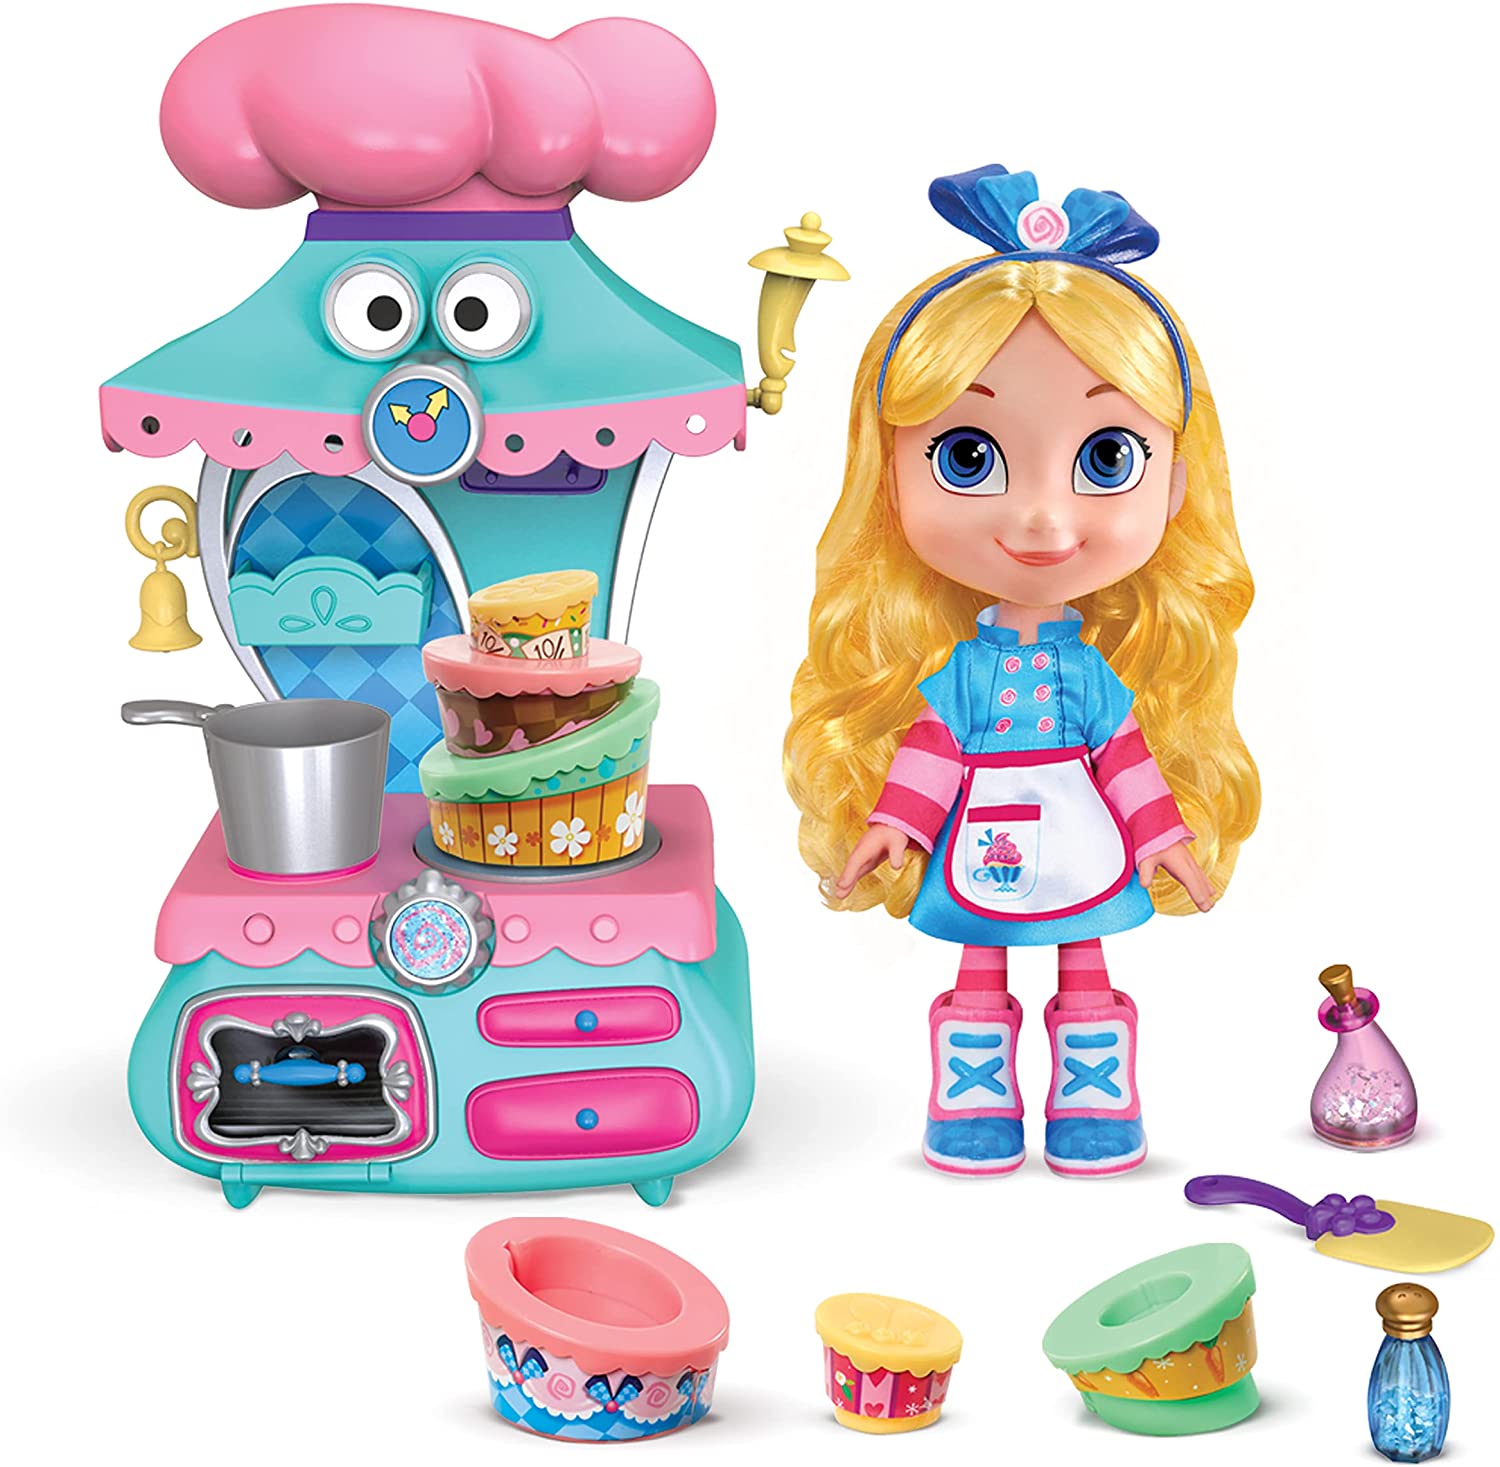 Alice's Wonderland Bakery unboxing @Midco Toymaster/ Toy Planet #fyp #